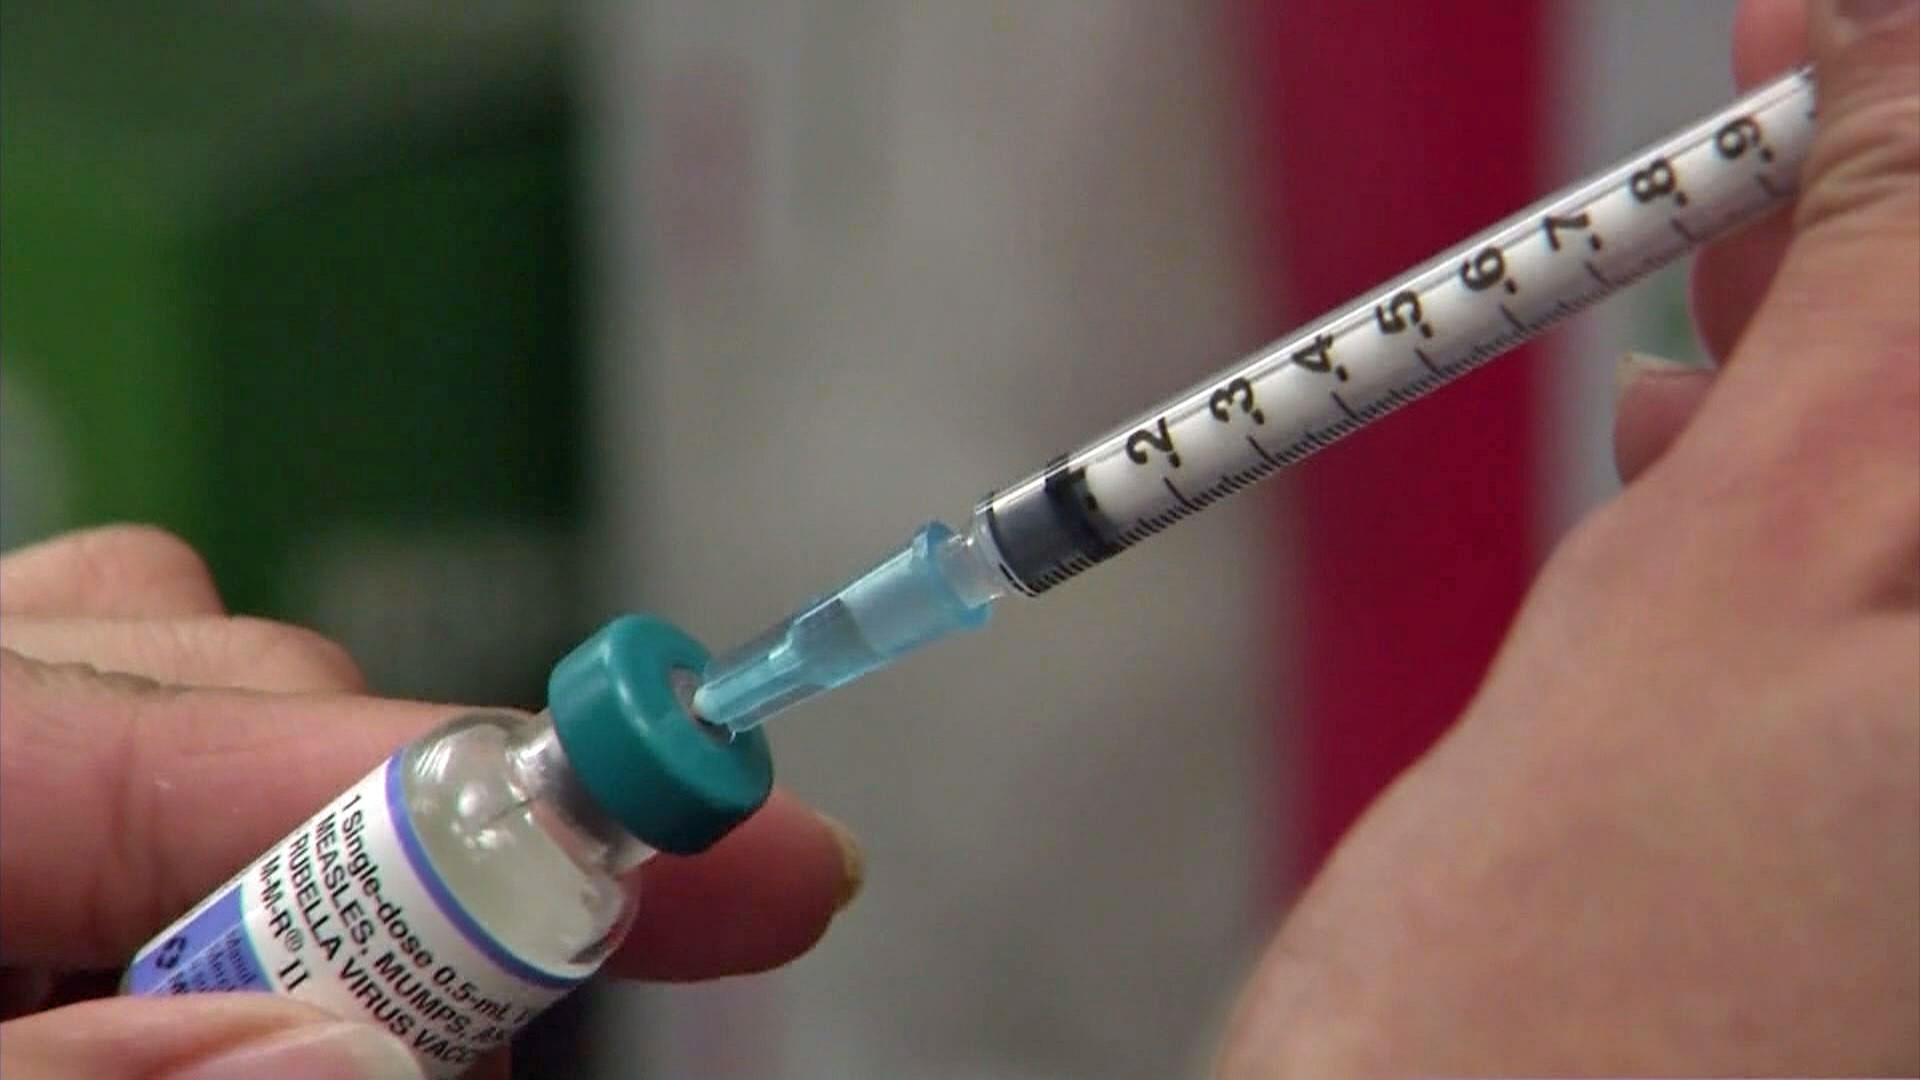 The state said it wants to put an emphasis on vaccinating people who are at least 75. because they are at the greatest risk when it comes to COVID-19.